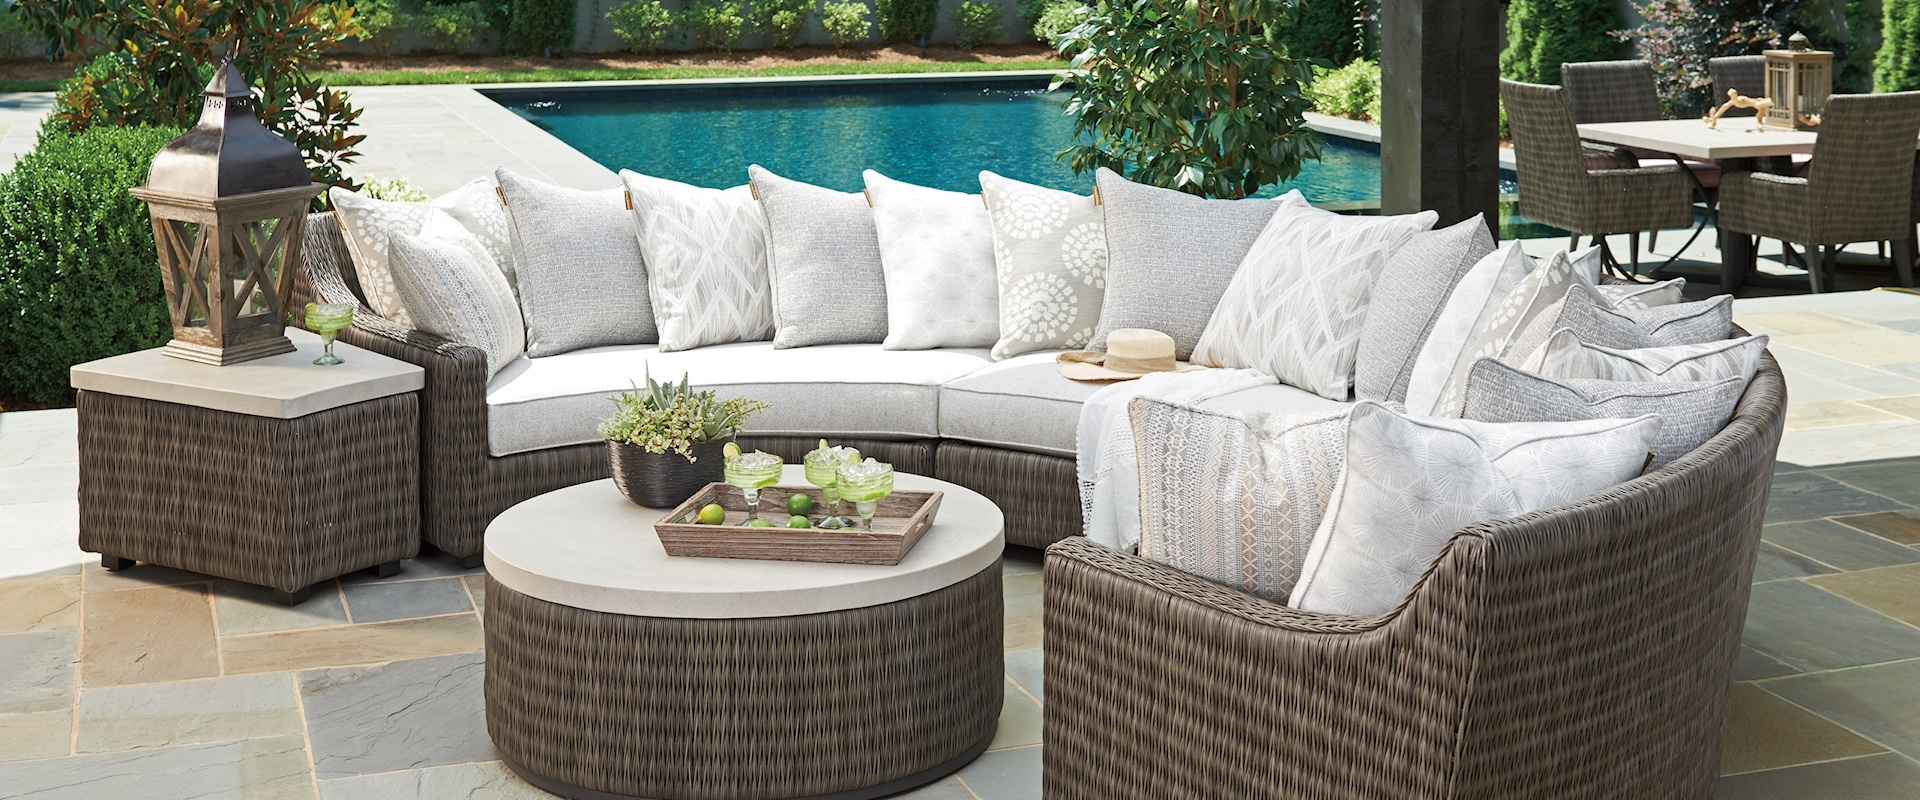 Outdoor Sectional Sofa Chat Set with Scatterback Cushions